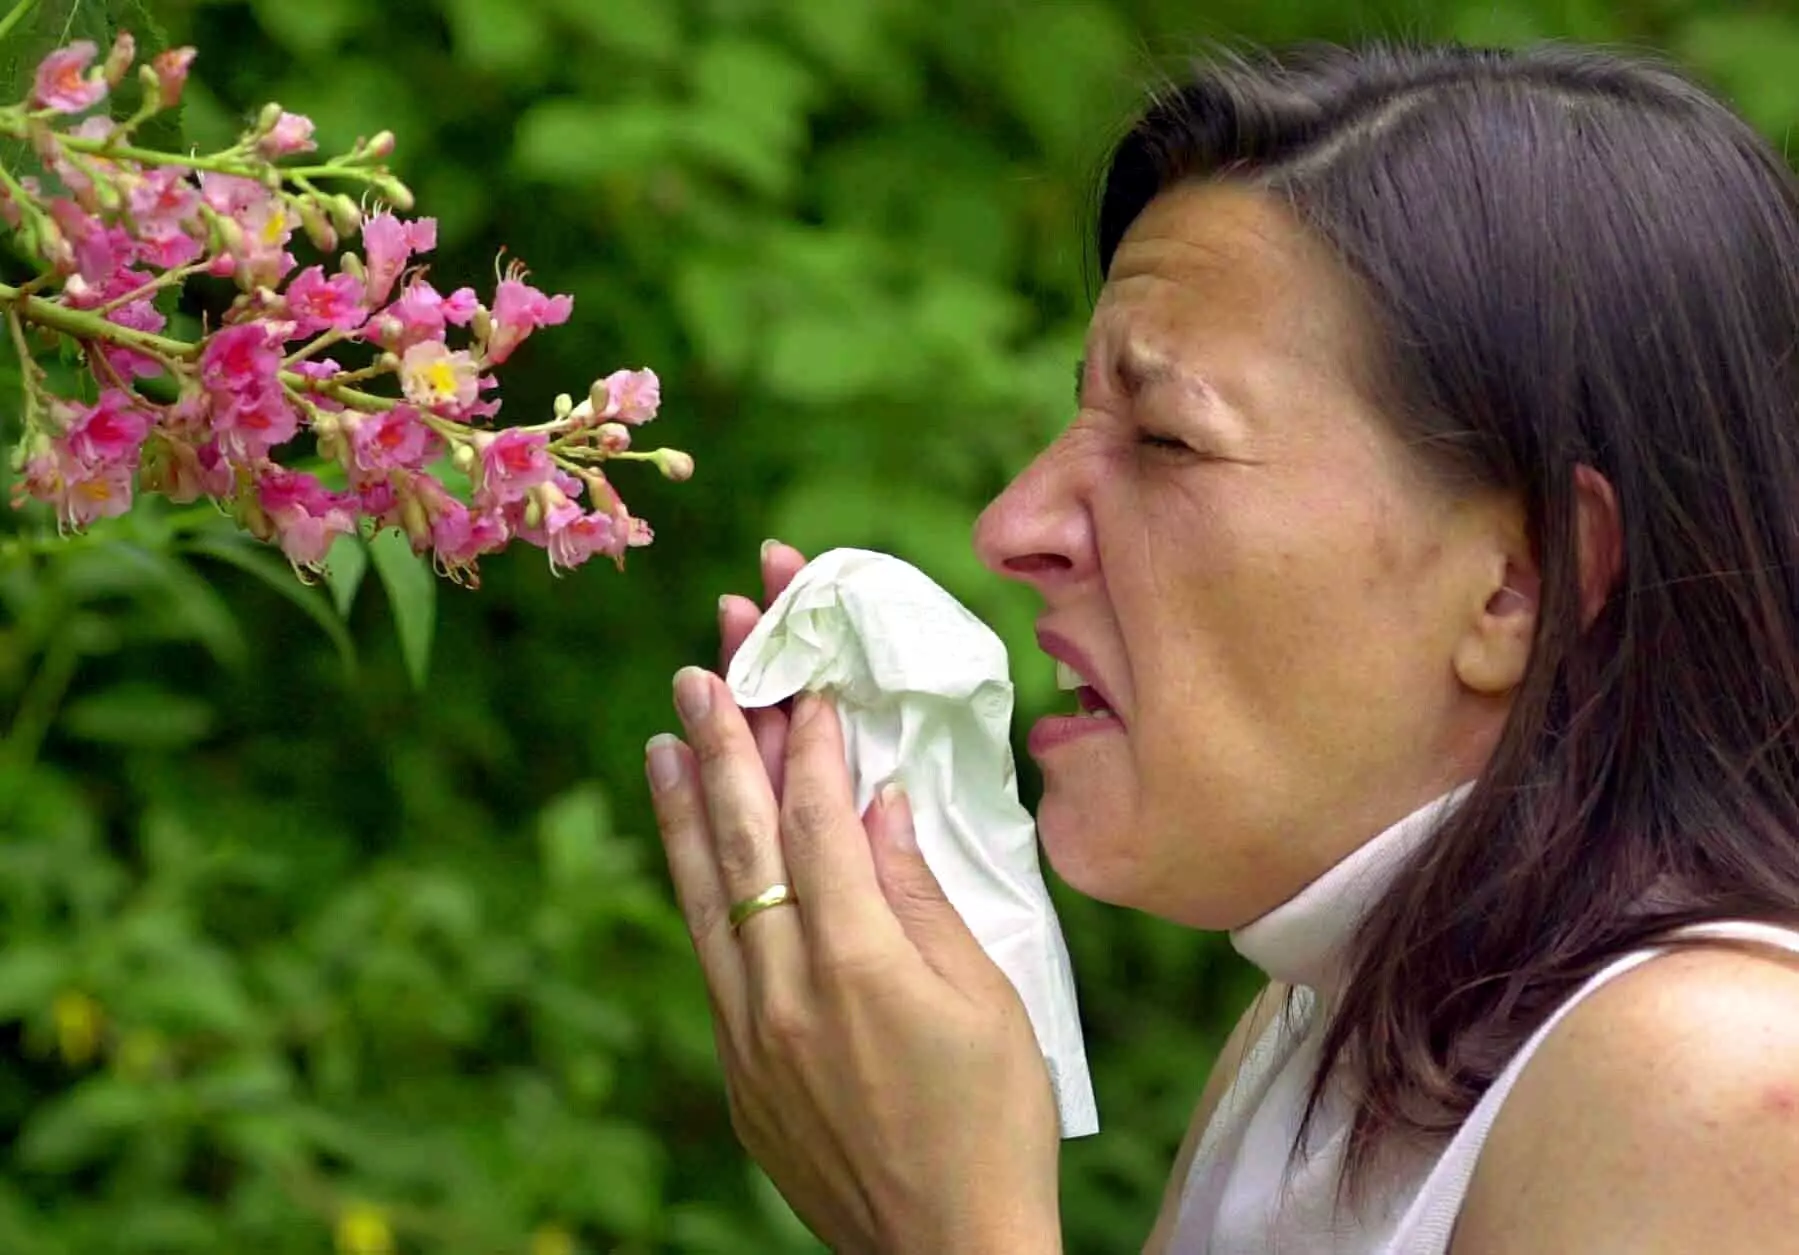 This week could be a bit of a sneeze fest for hay fever sufferers.